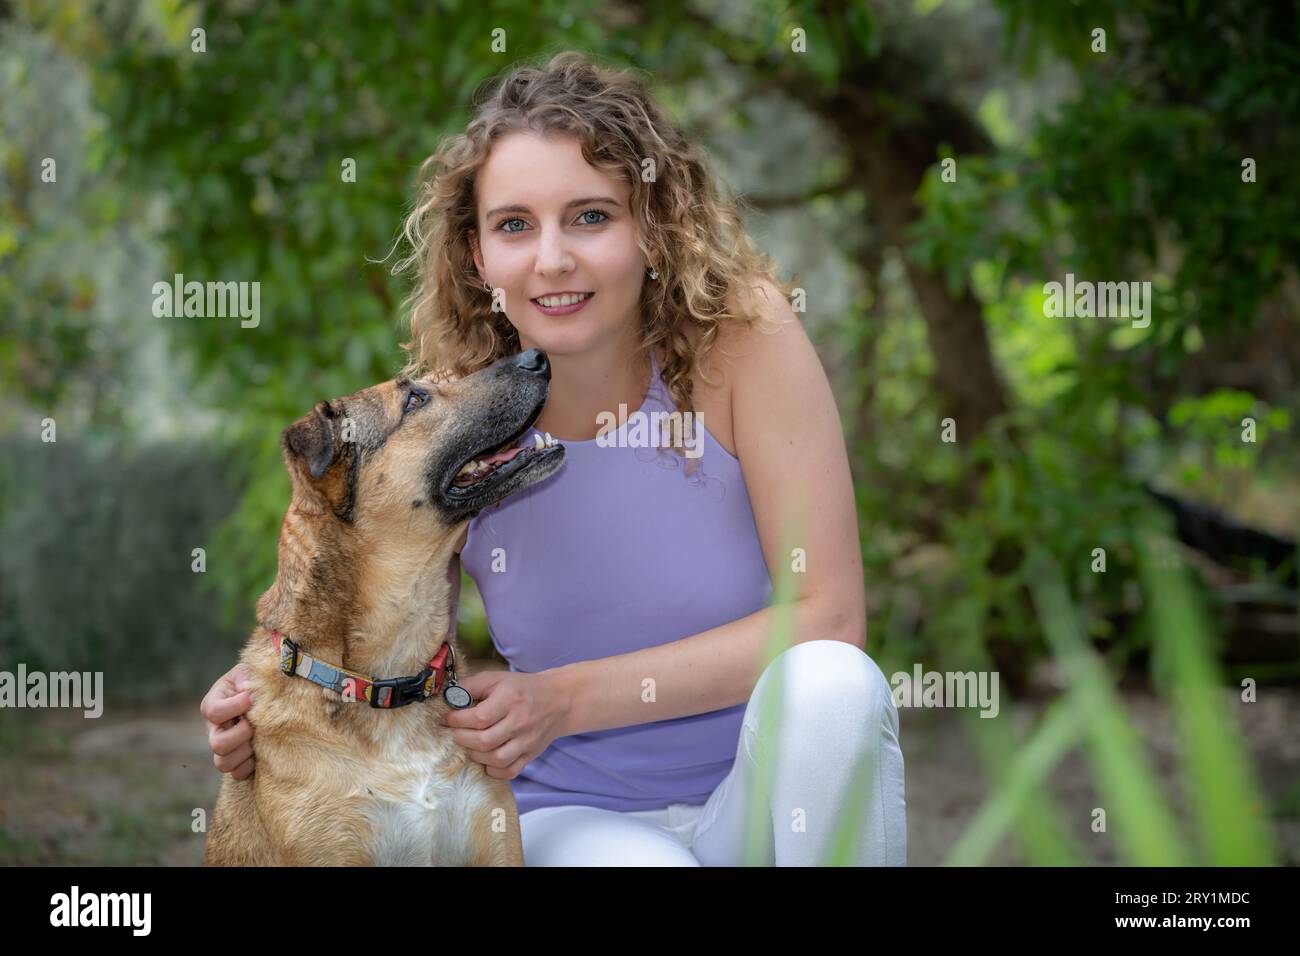 Head and shoulders portrait of a smiling, young Caucasian woman with curly blonde hair and blue eyes, outdoors in Summer with her pet dog Stock Photo